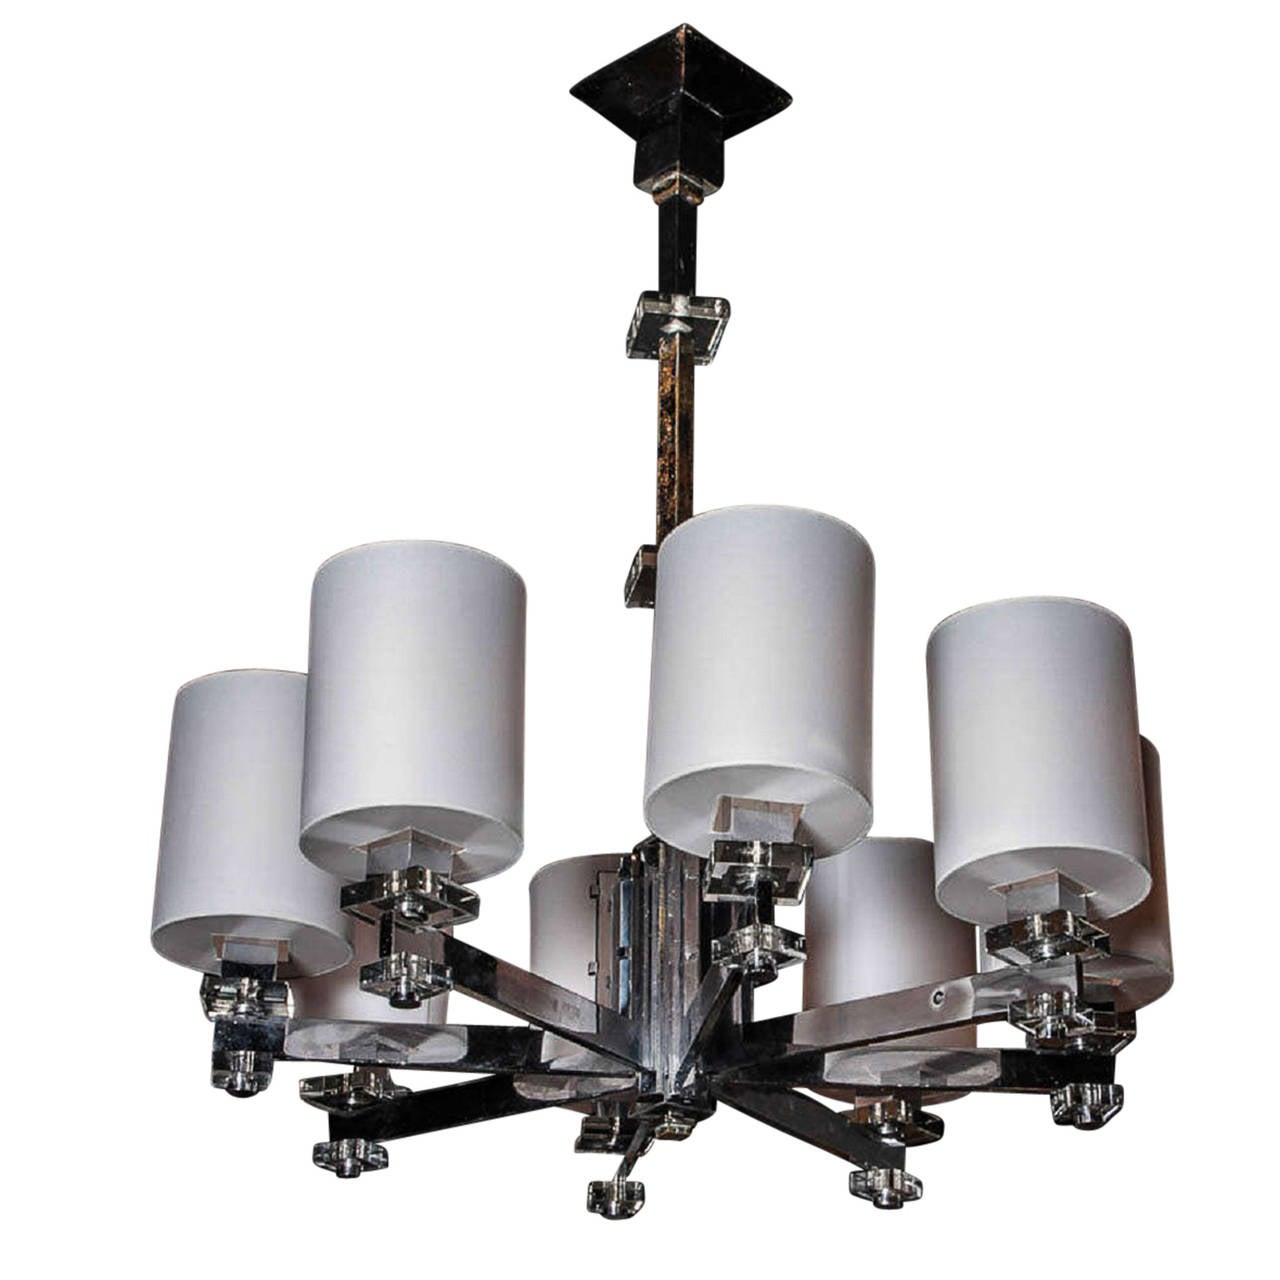 Nickel and crystal eight-arm chandelier, in custom shades by Jacques Adnet, French, 1940s. Diameter 30 in, overall height 35 in.